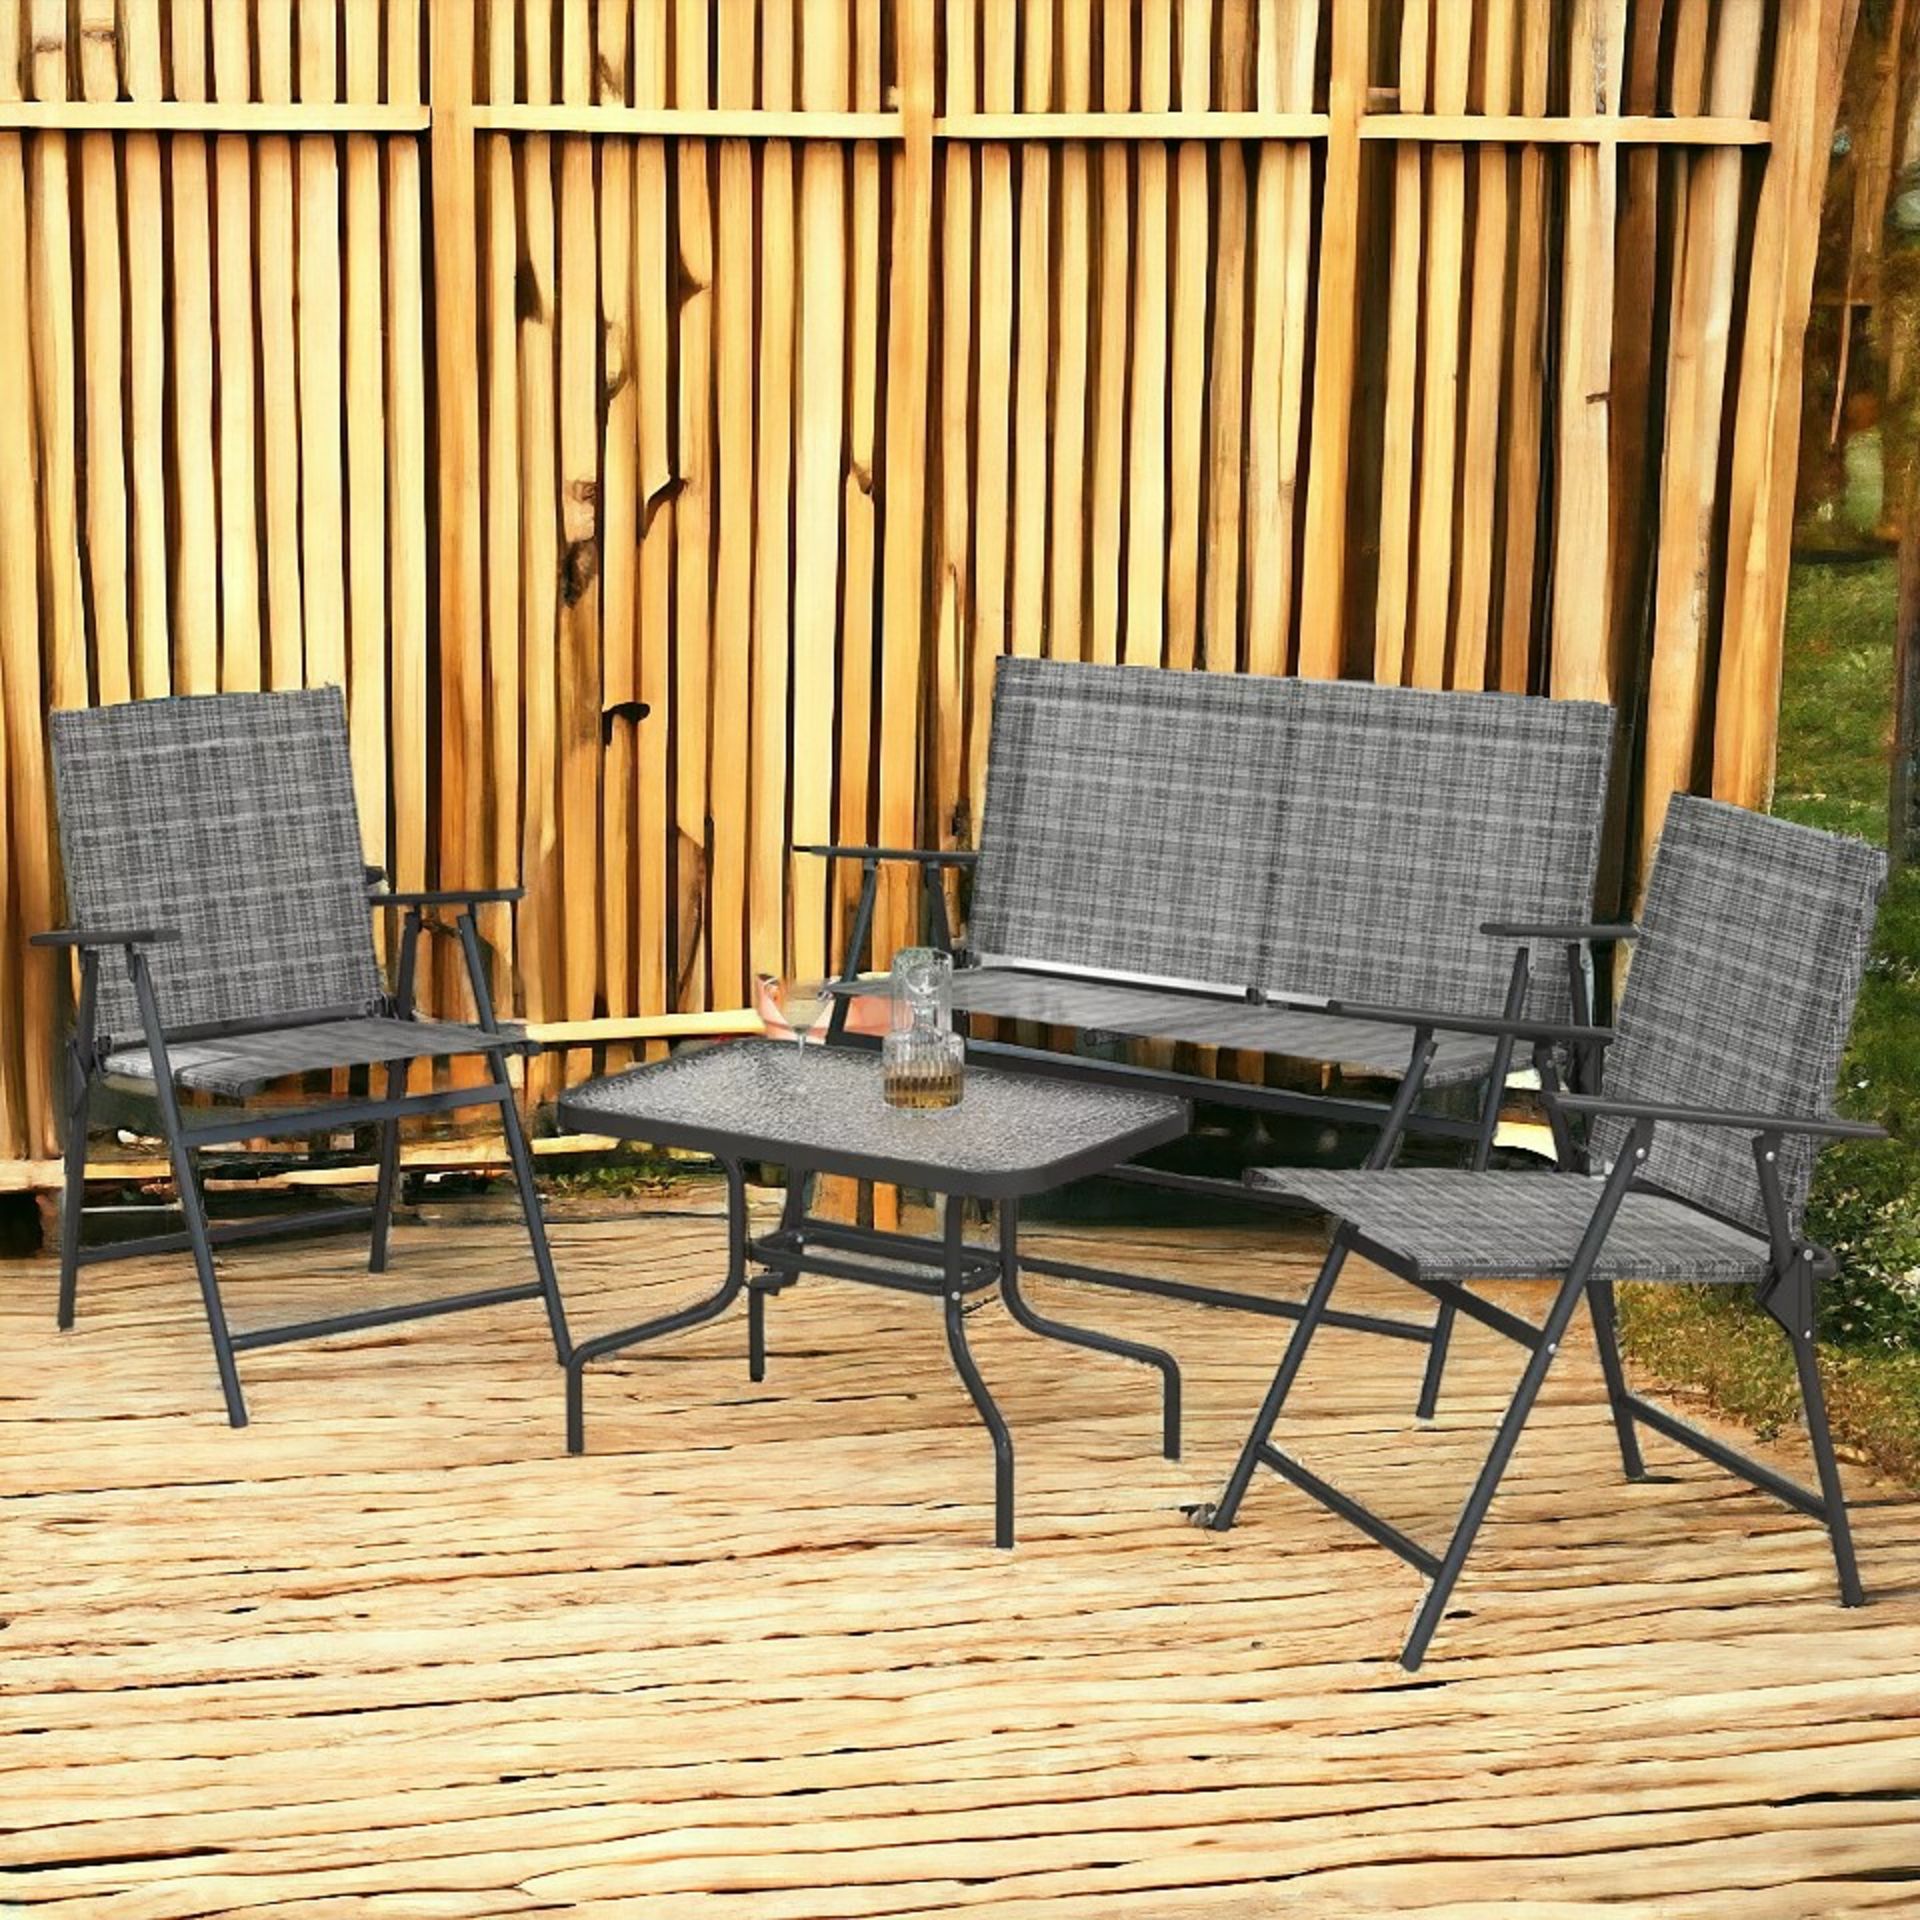 FREE DELIVERY - BRAND NEW PATIO FURNITURE SET, GARDEN SET W/ TABLE, FOLDABLE CHAIRS, A LOVESEAT - Image 2 of 2